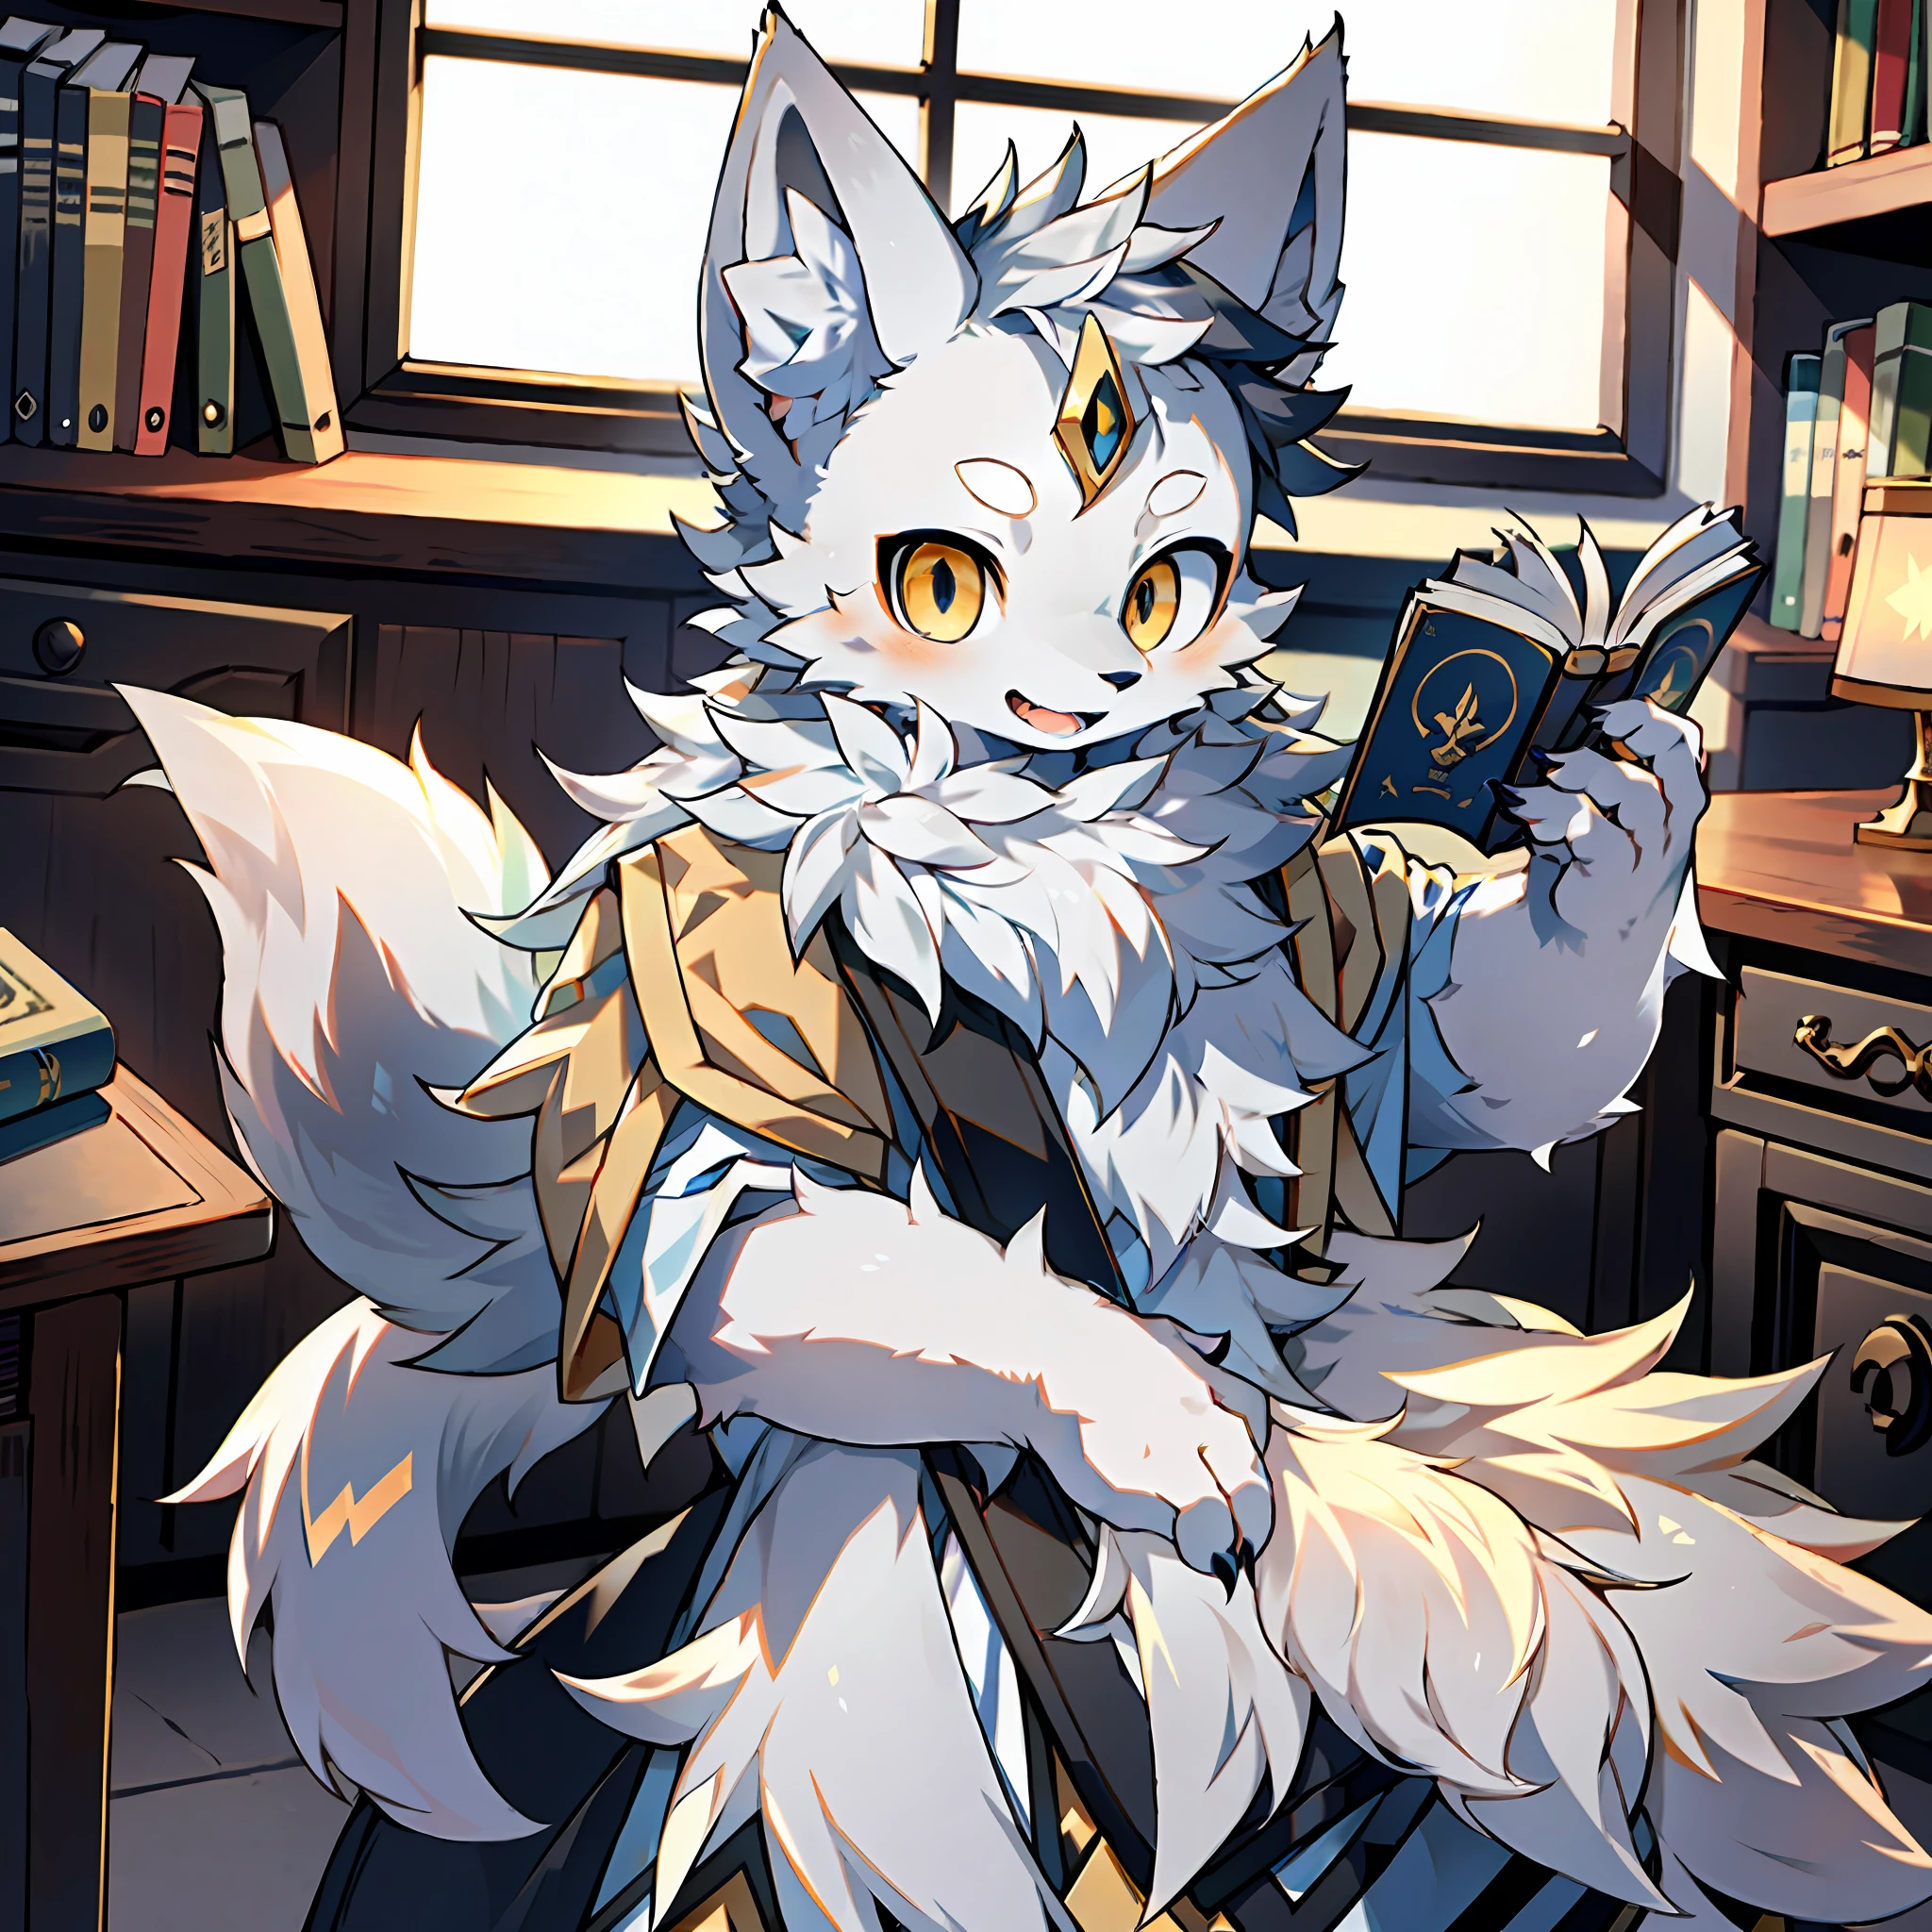 (Best Quality), (Masterpiece), ((Solitary)), (Ultra Detailed), (Furry), (Furry, (Male Arctic Fox: 1.5), (Gray Fur: 1.3), (Fluffy Tail: 1.2), (Golden Eyes), (Sharp Claws), (Gray Ears), Open Mouth, Sharp Focus, (Furry Animal Ears), Straight Face, Looking at the Viewer, ((In the Study)), ((Reading a Book Before Sitting in the Room))), Natural Daylight